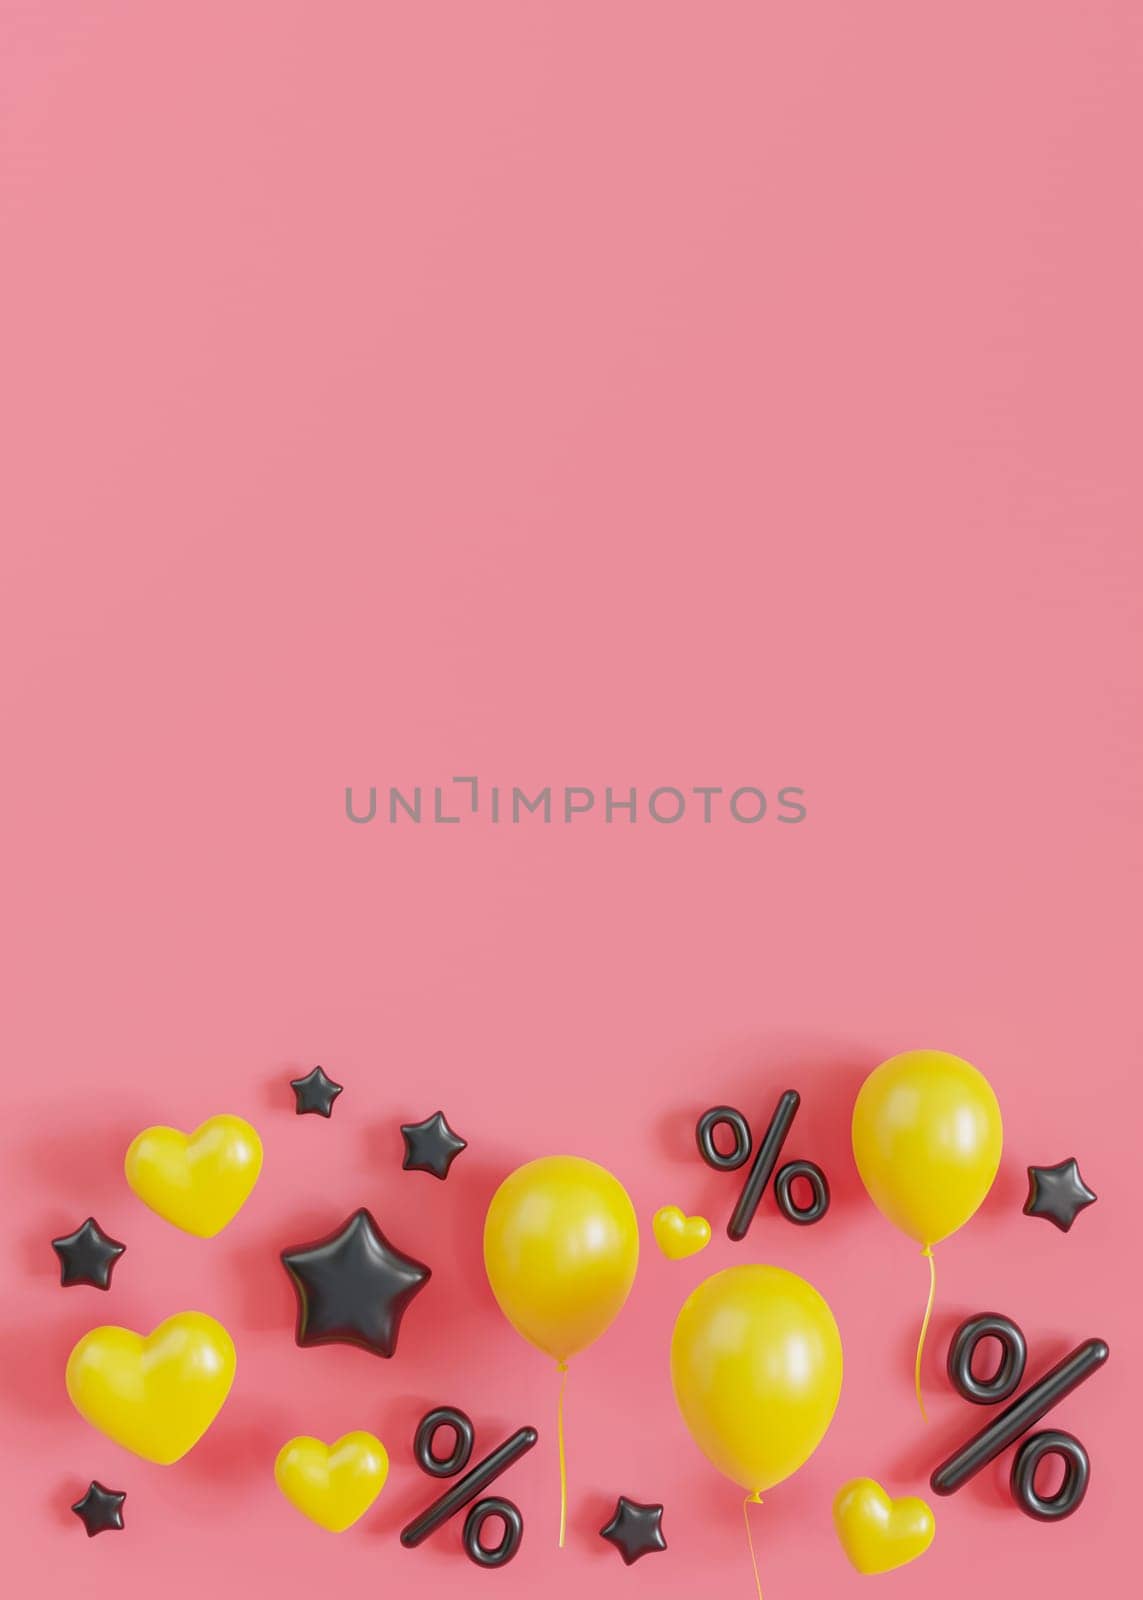 Black percentage symbols and yellow balloons on a soft pink backdrop, perfect for festive promotions, special events, and sales marketing materials. Vertical background with empty space for text. 3D